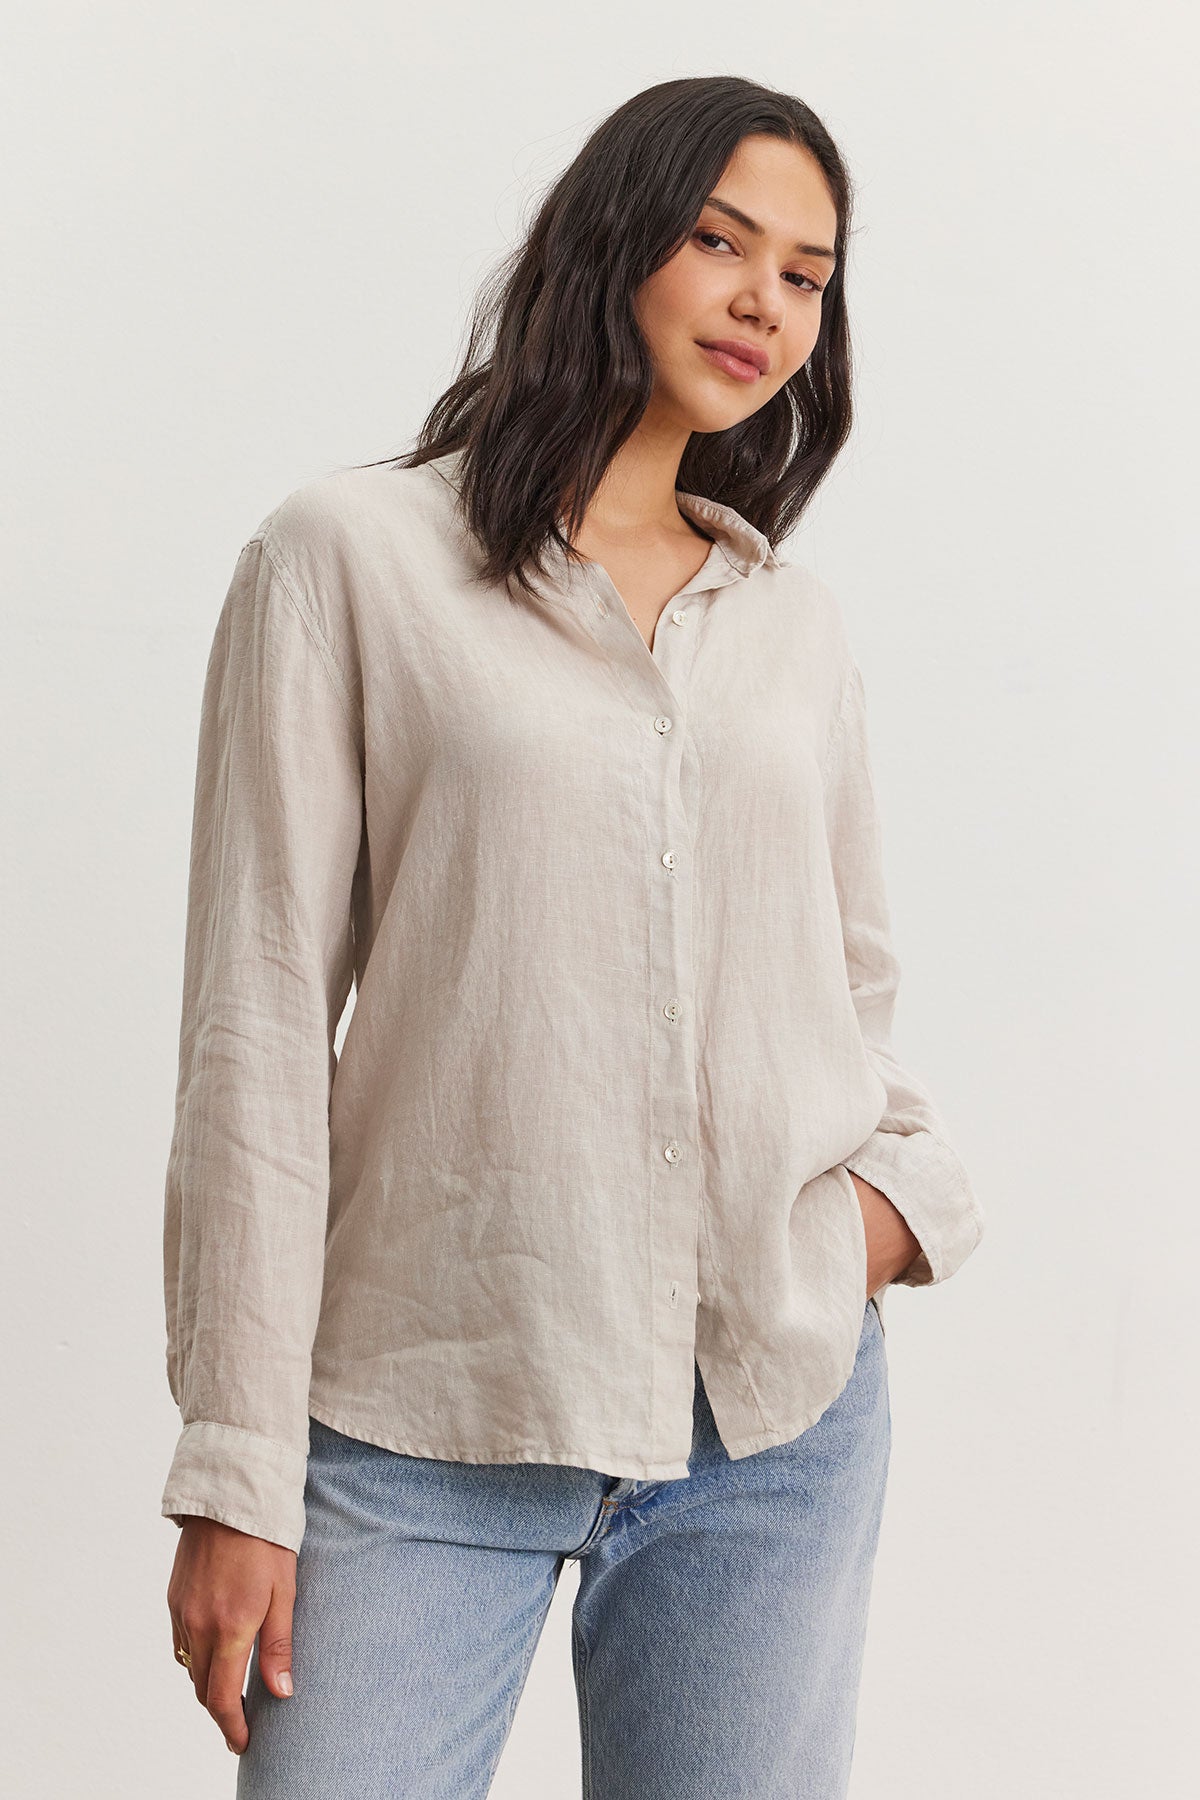 A woman wearing a Velvet by Graham & Spencer Willow Linen Button-Up Shirt paired with denim jeans stands confidently while slightly tilting her head, giving a relaxed pose in a bright indoor setting.-36998739067073